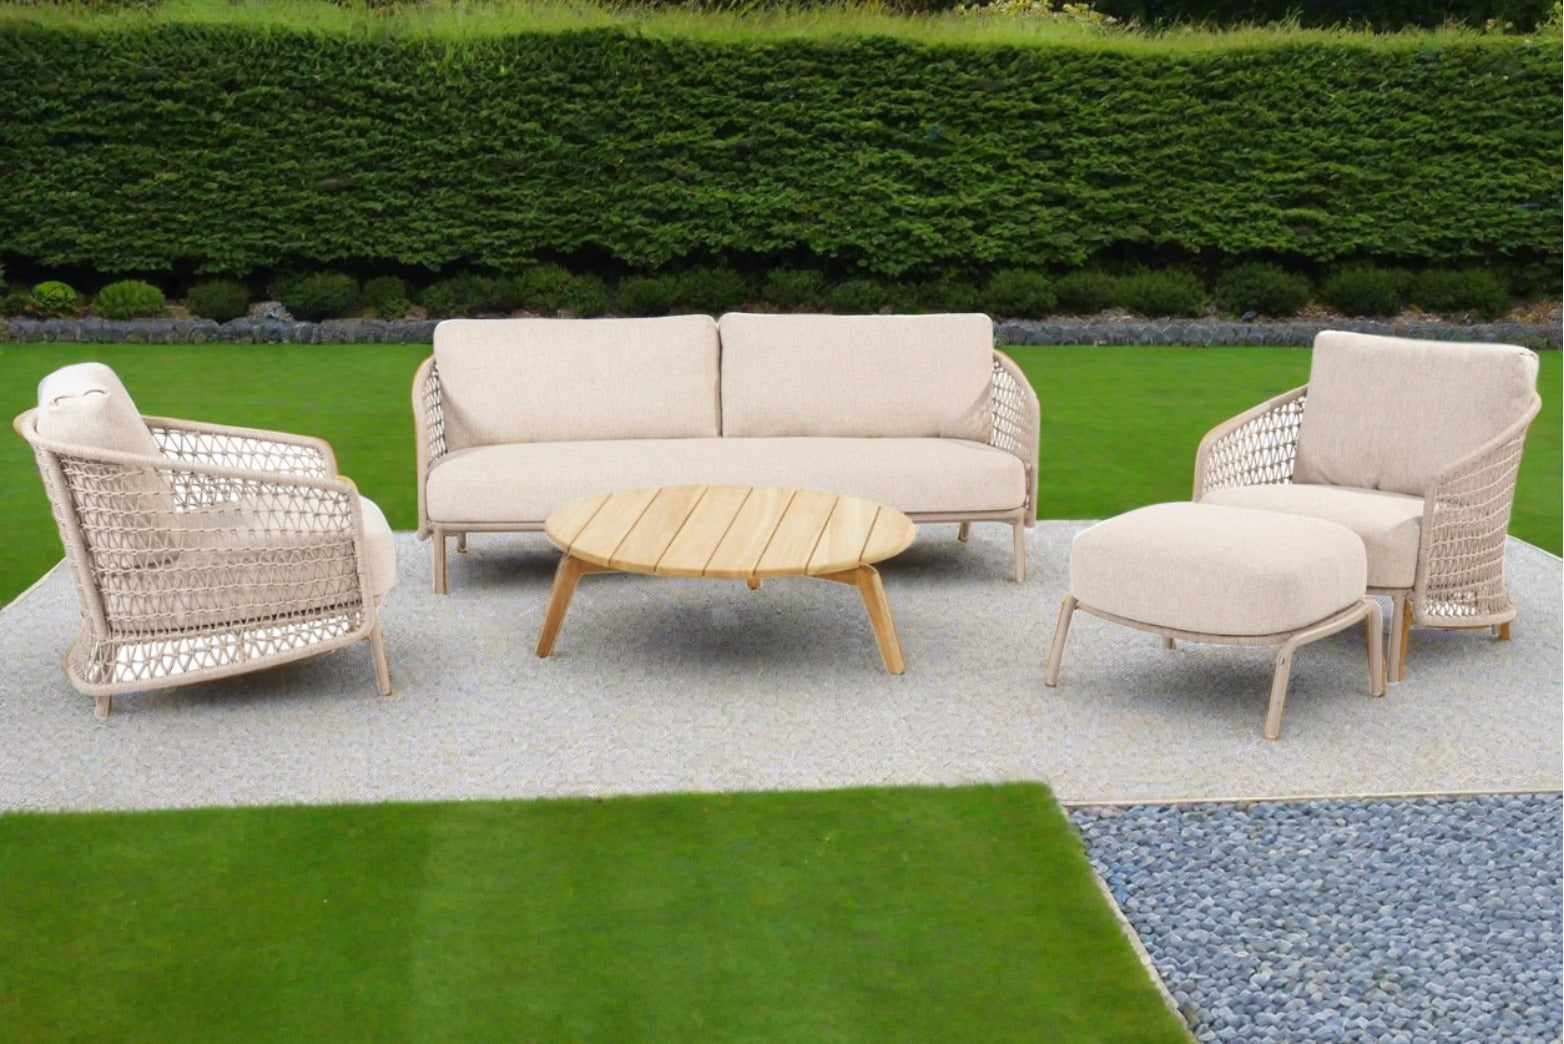 Puccini Outdoor Lounge Set by 4 Seasons Outdoor